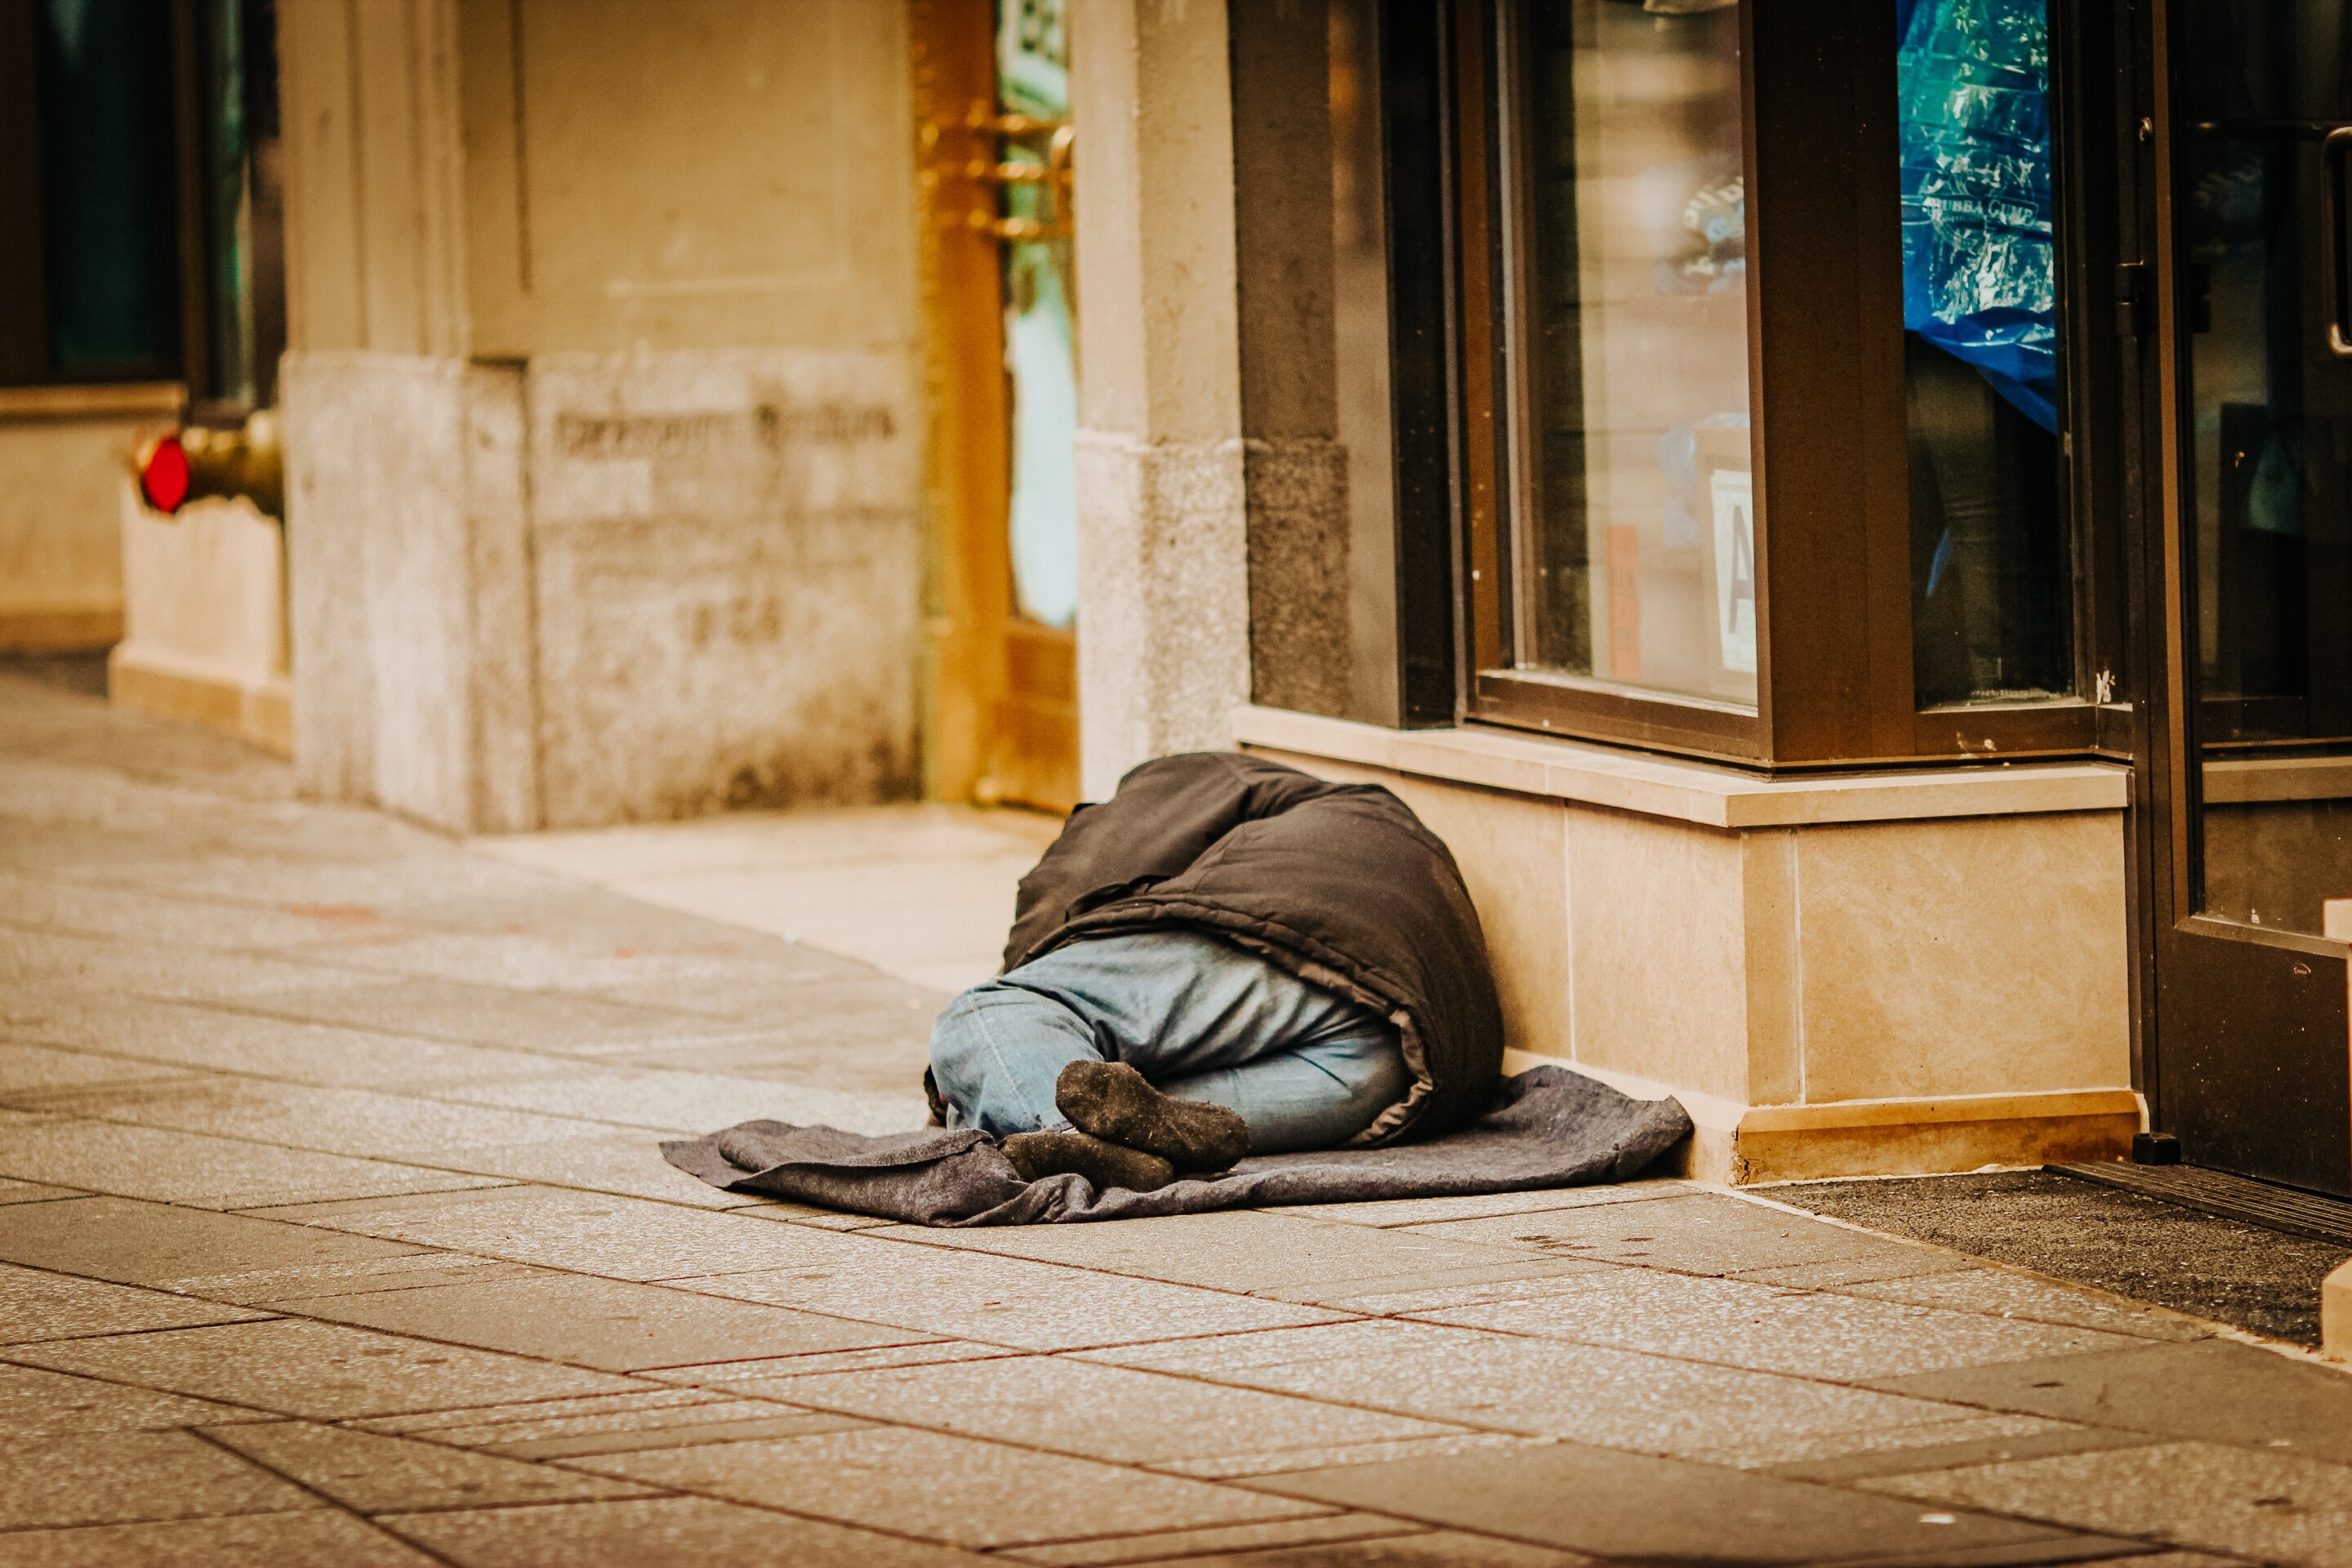 Black and minoritized ethnic communities at disproportionate risk of homelessness in the UK